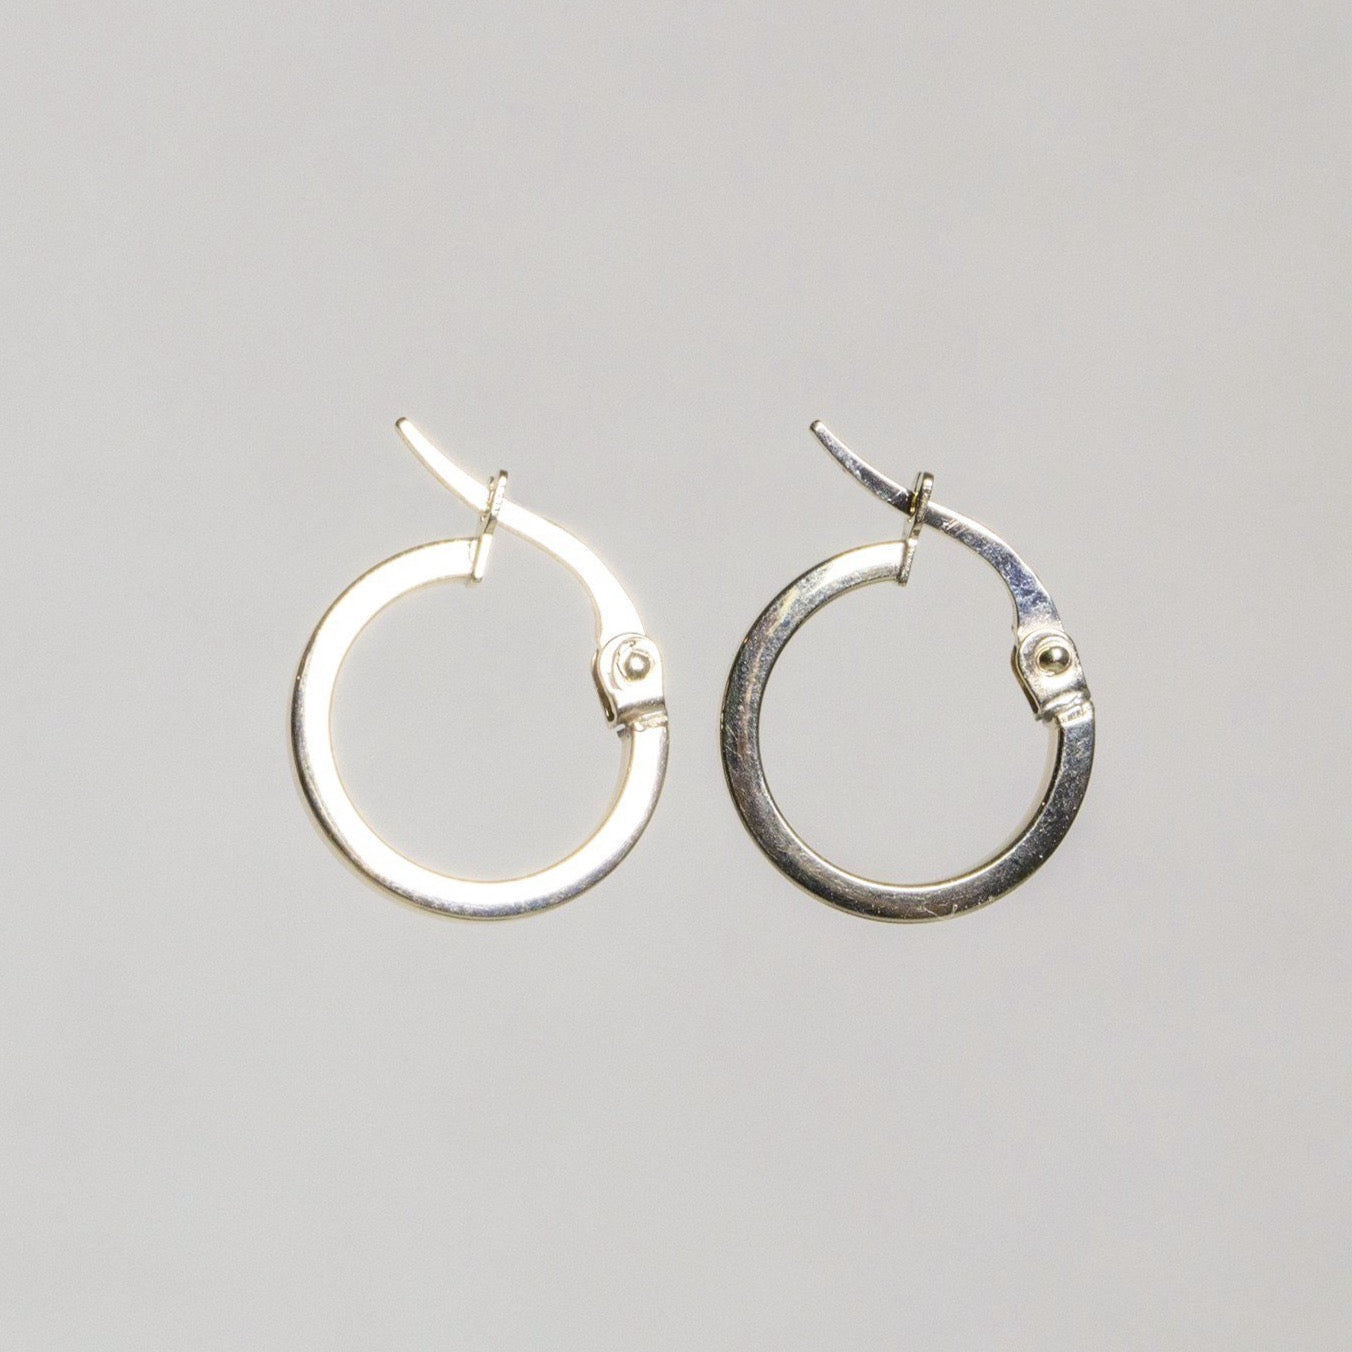 fantastically modern and light gold hoops